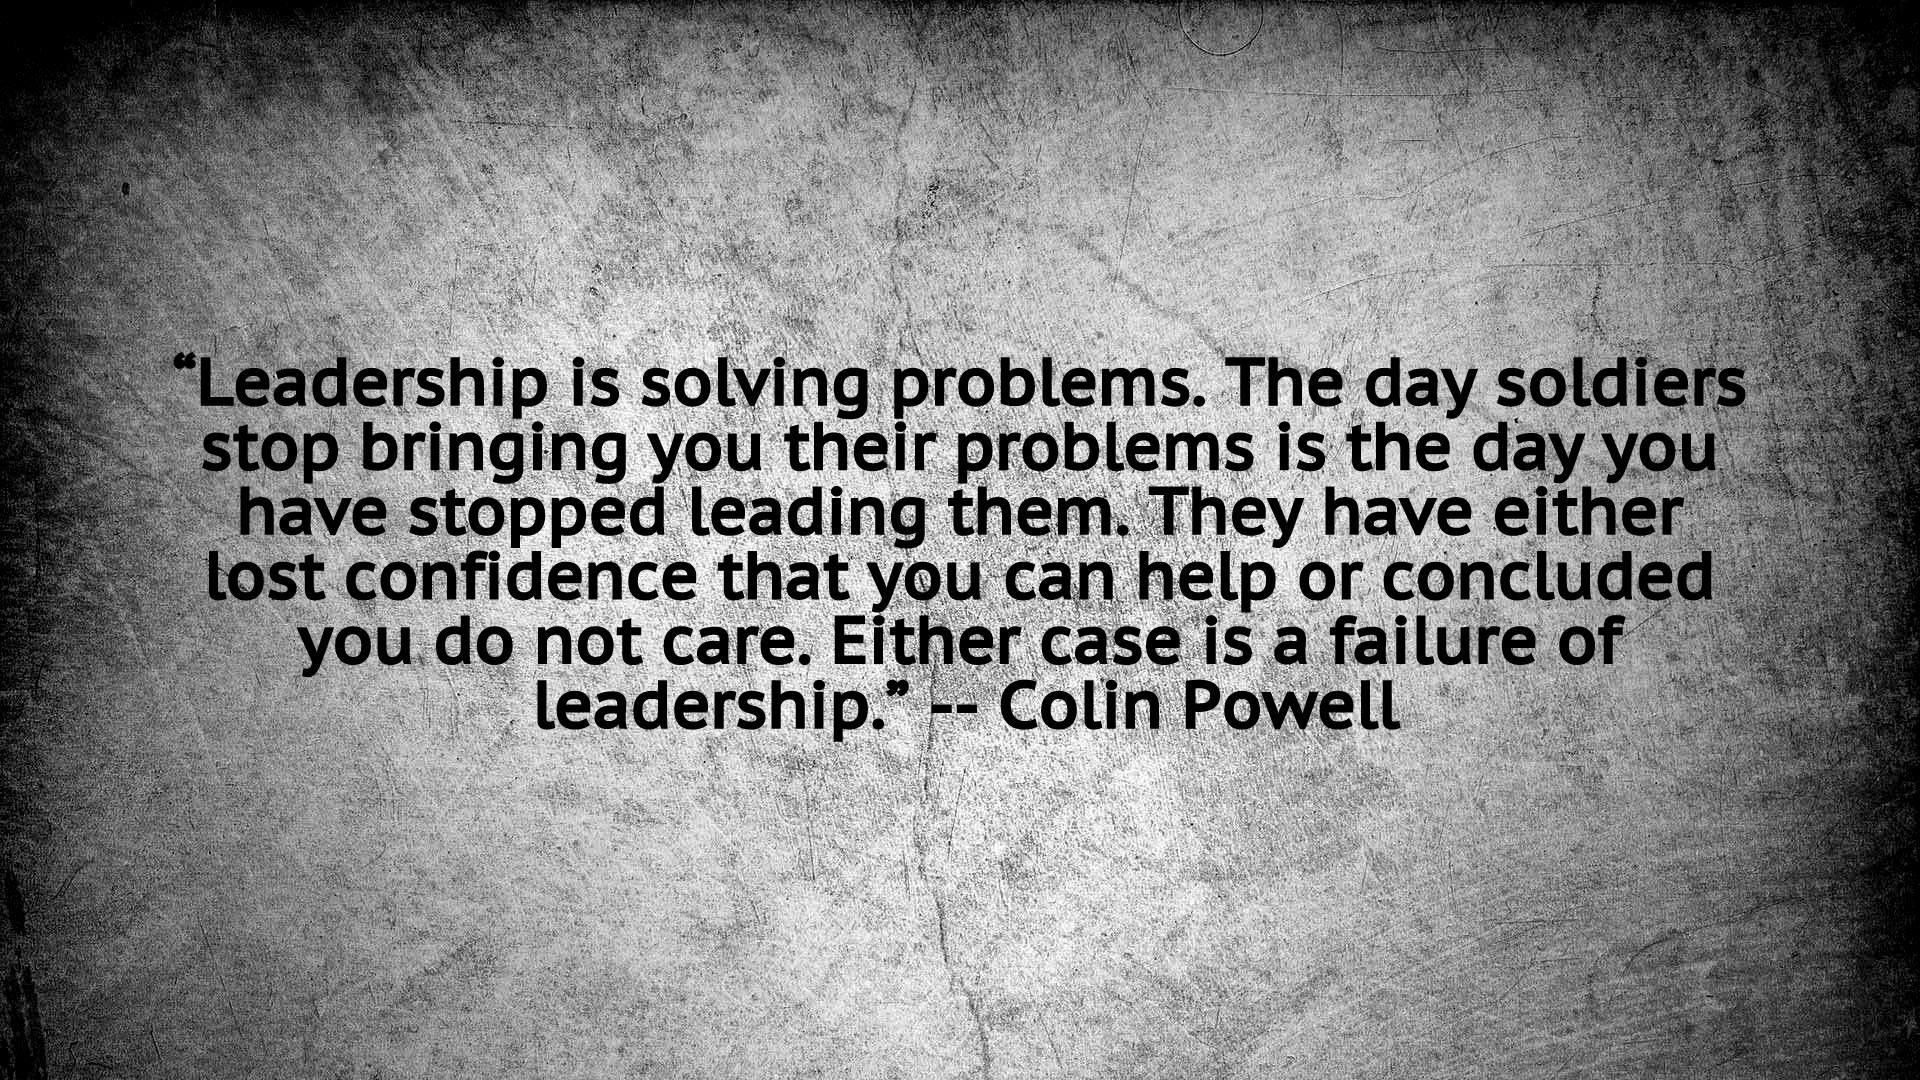 Colin Powell Quotes Leadership
 inspiration